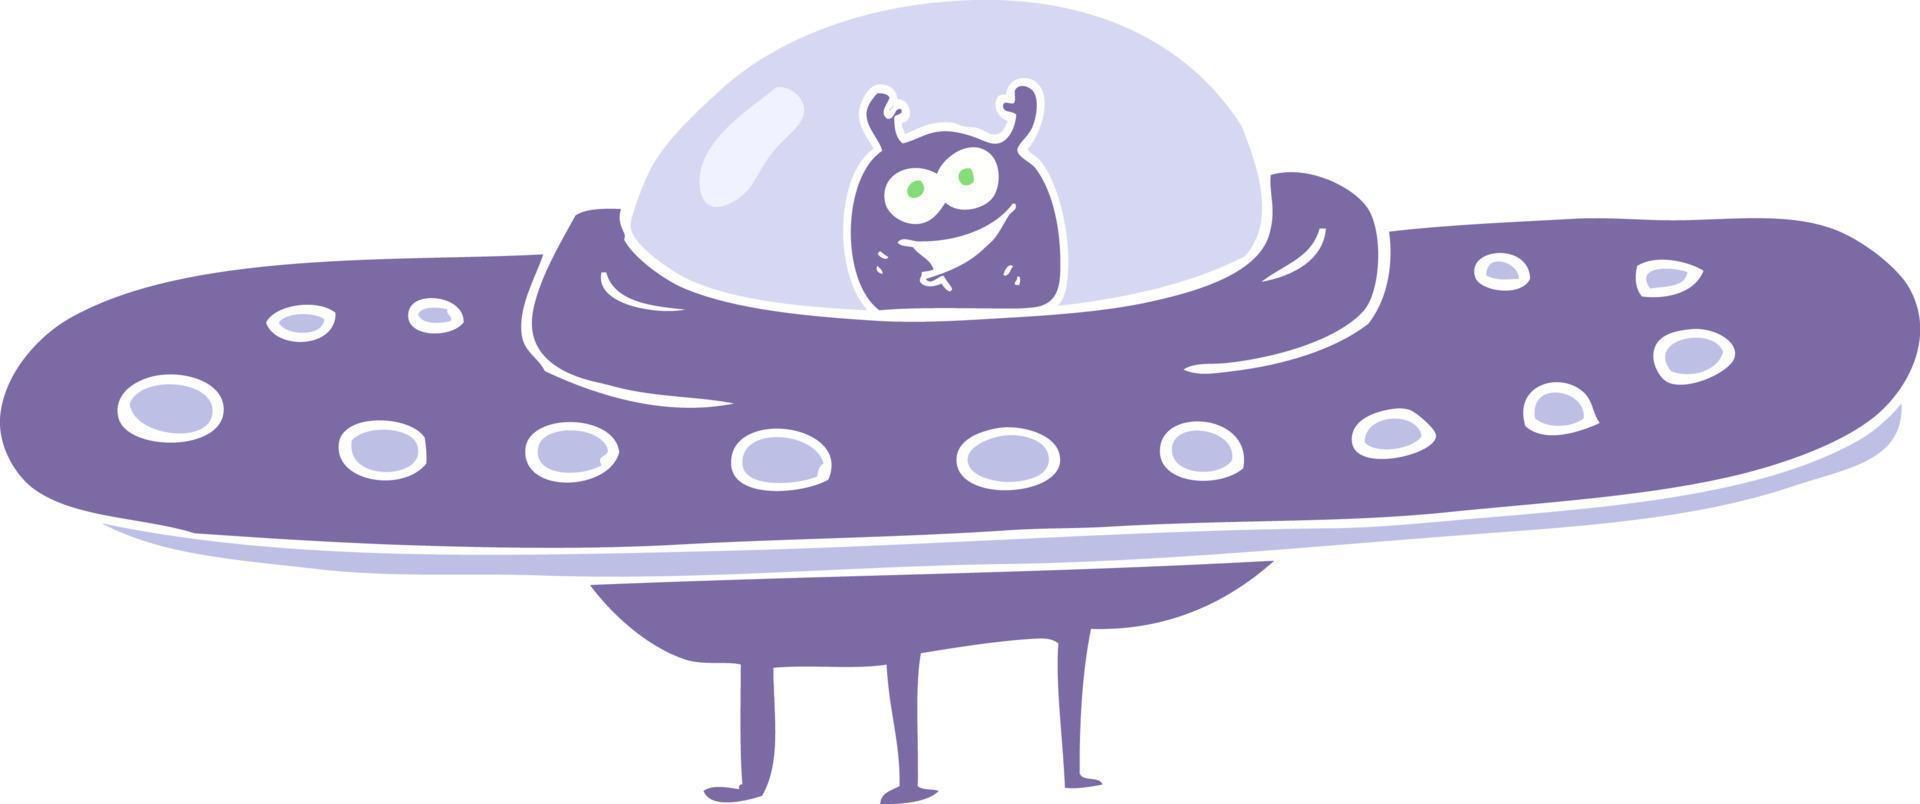 flat color illustration of a cartoon flying saucer vector